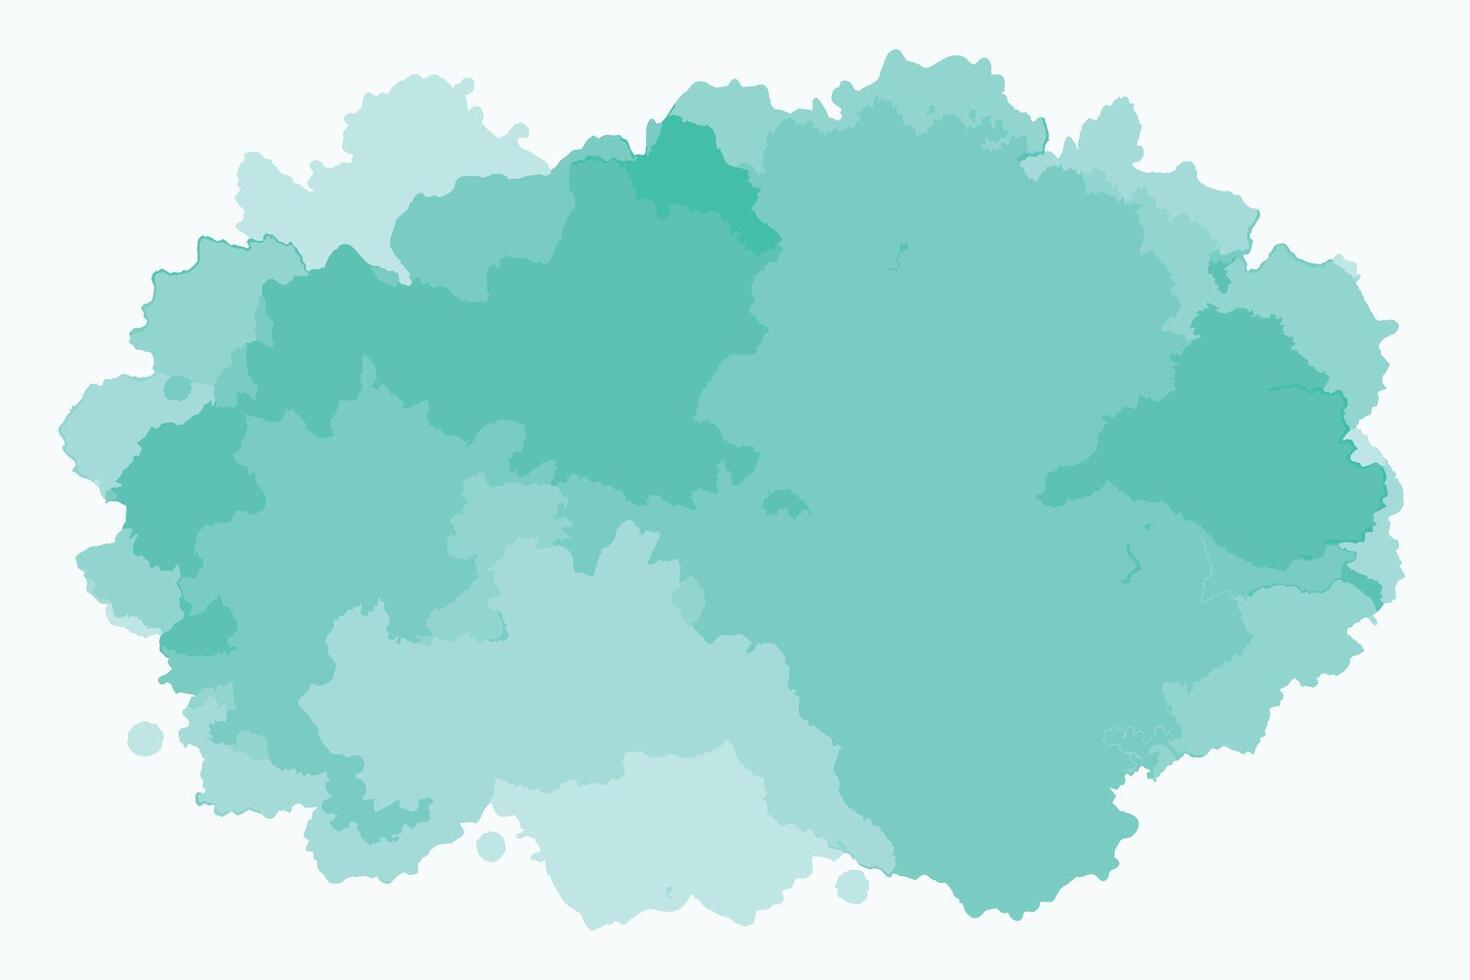 Pretty Watercolor Background In Turquoise Color vector